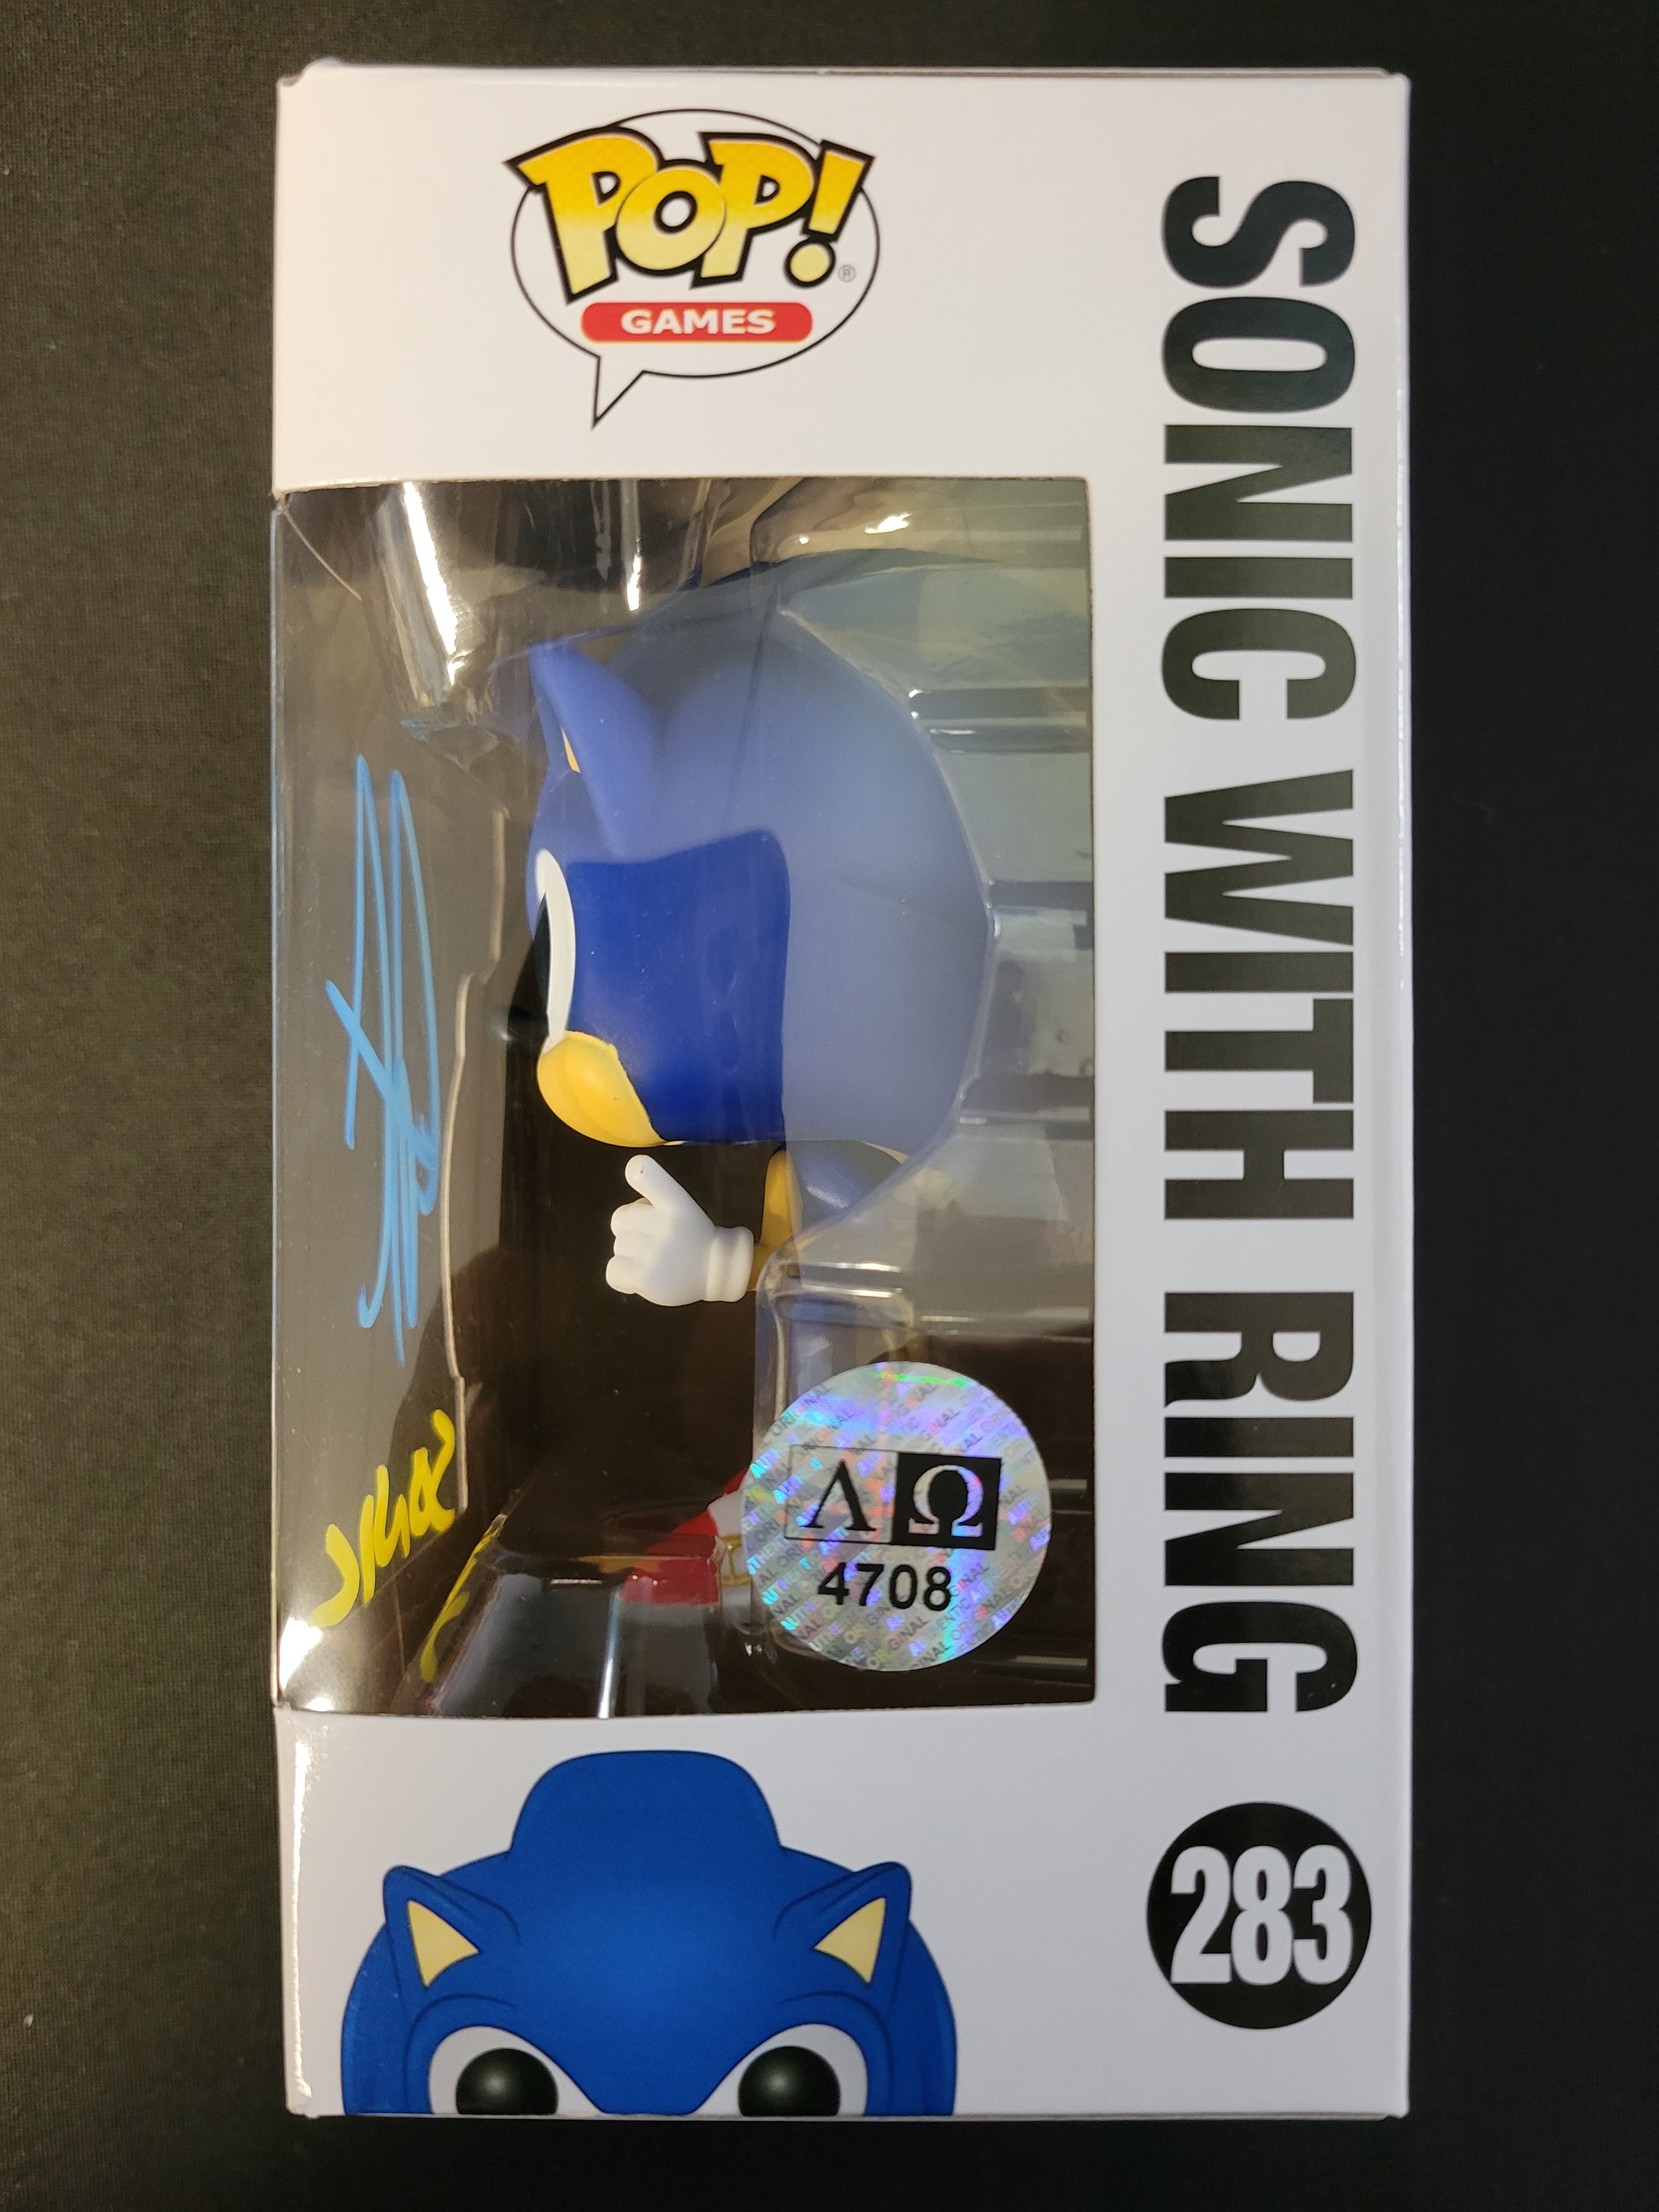 Funko Pop: Sonic The Hedgehog with Ring #283 Auto by Jason Griffith - Cert 708